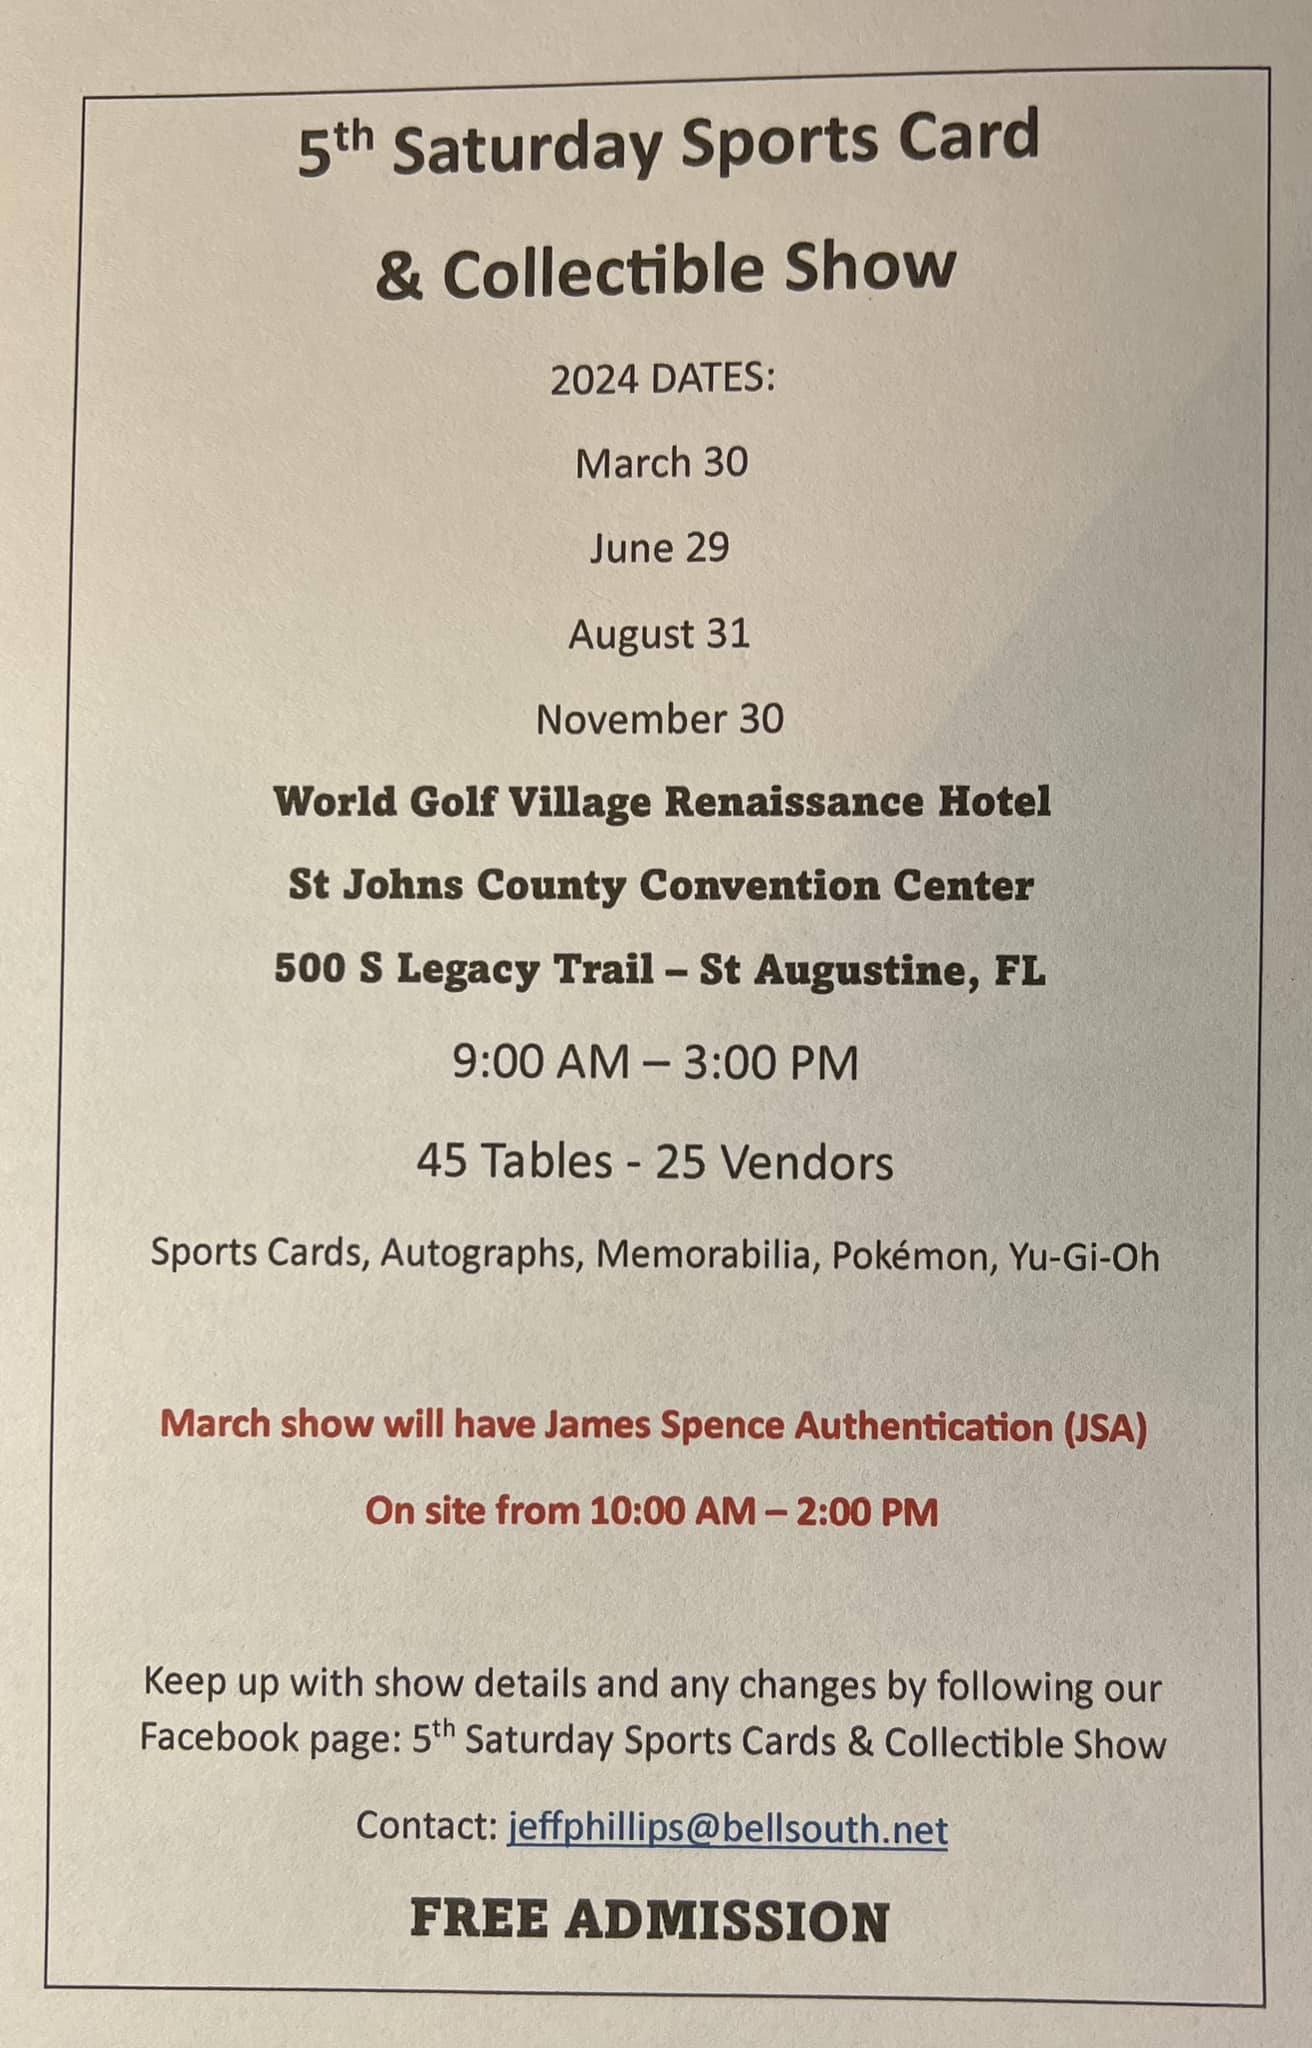 5th Saturday Sports Card & Collectible Show - St. Augustine